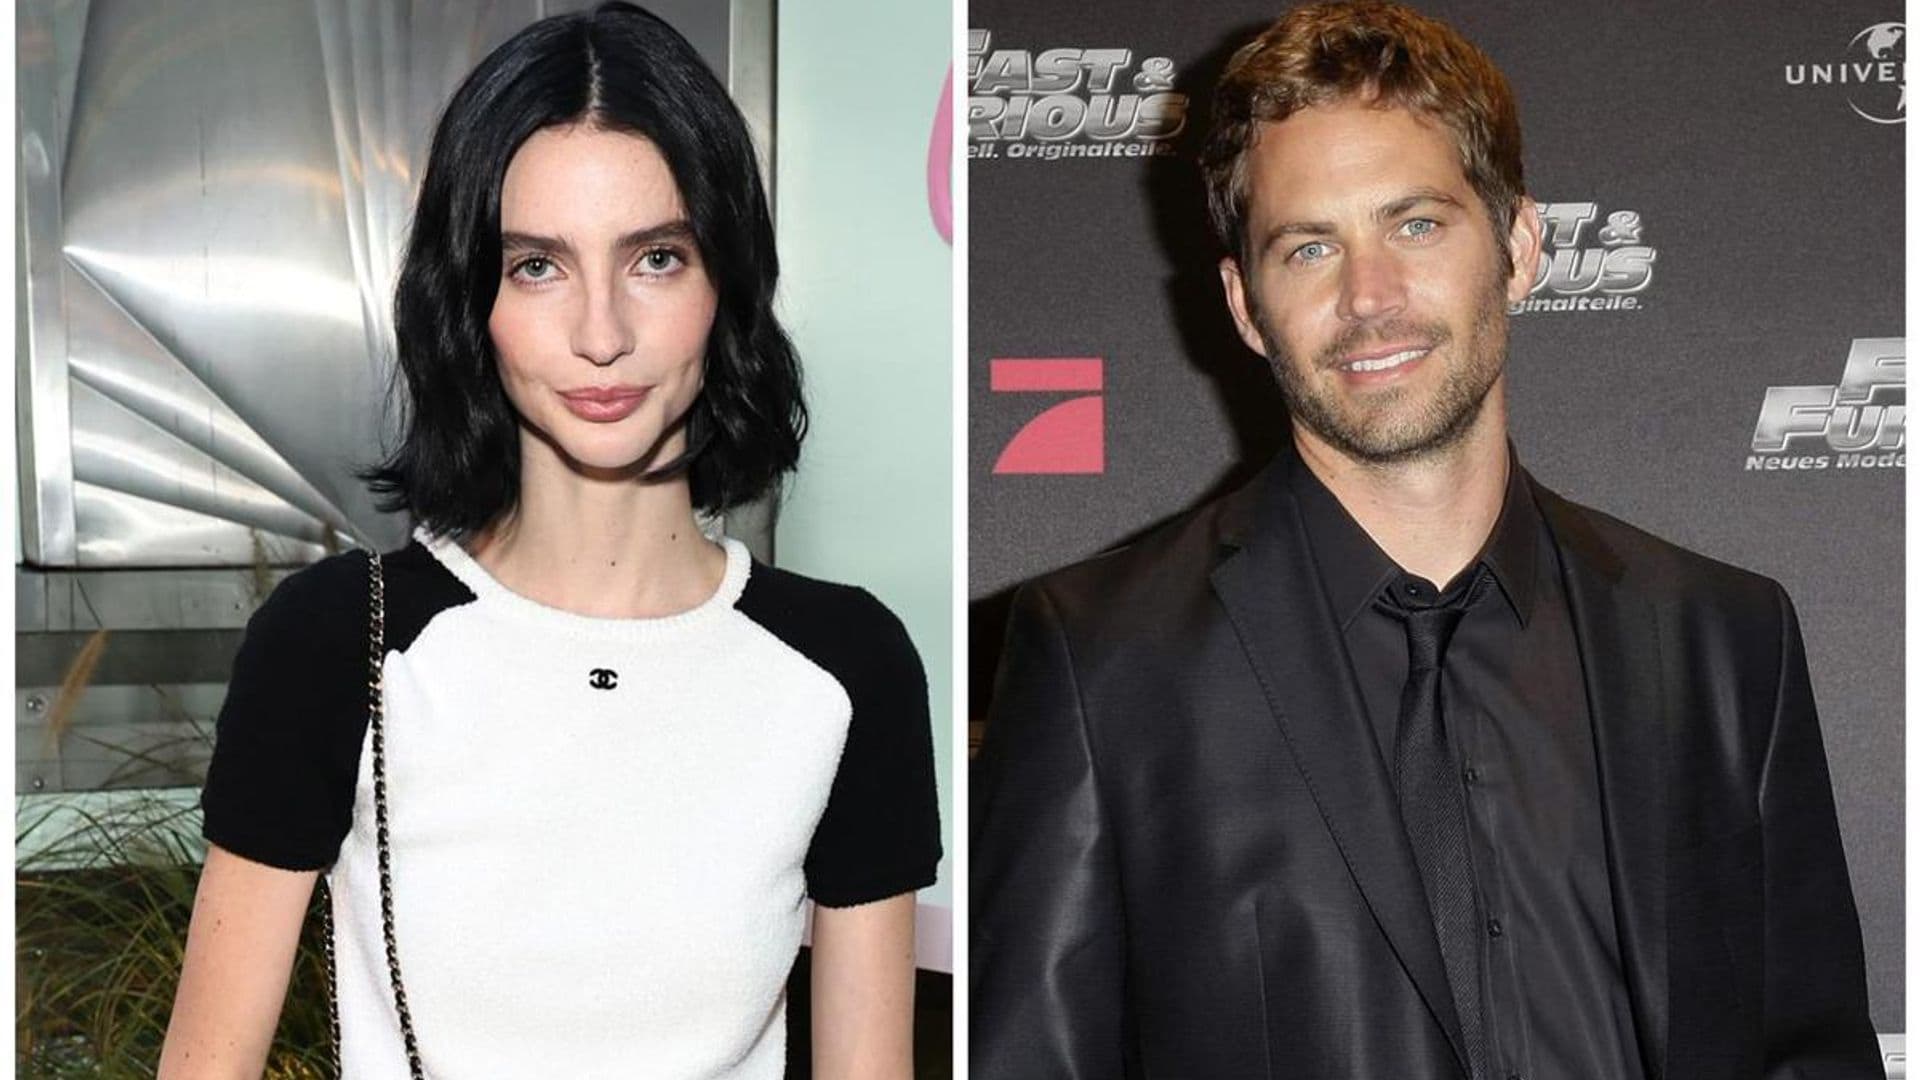 Watch Paul Walker’s daughter Meadow tribute her dad on the 10th anniversary of his death﻿